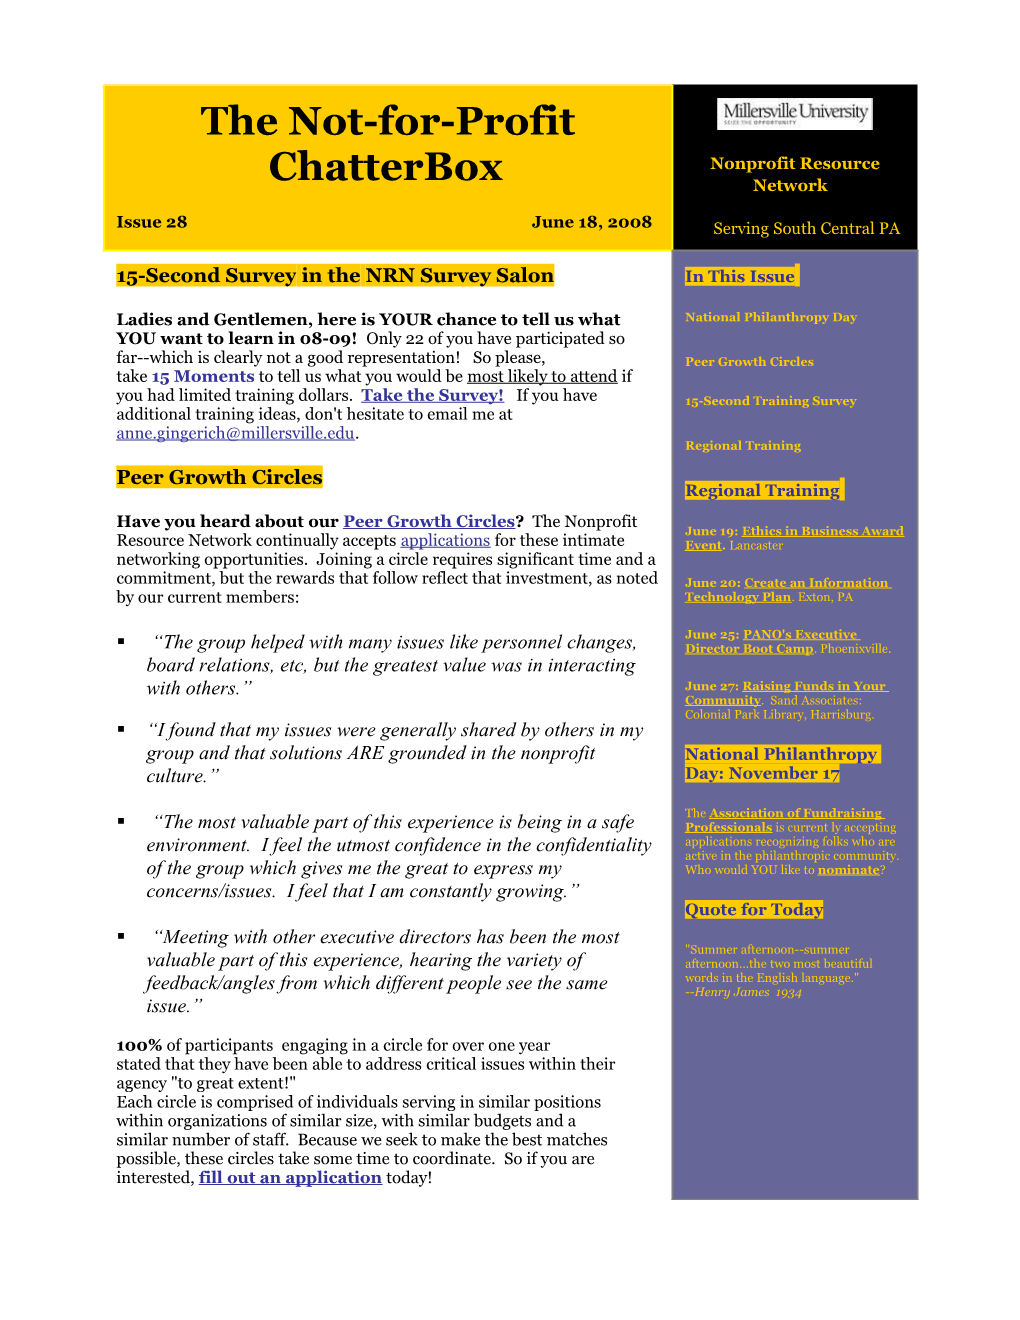 The Not-For-Profit Chatterbox